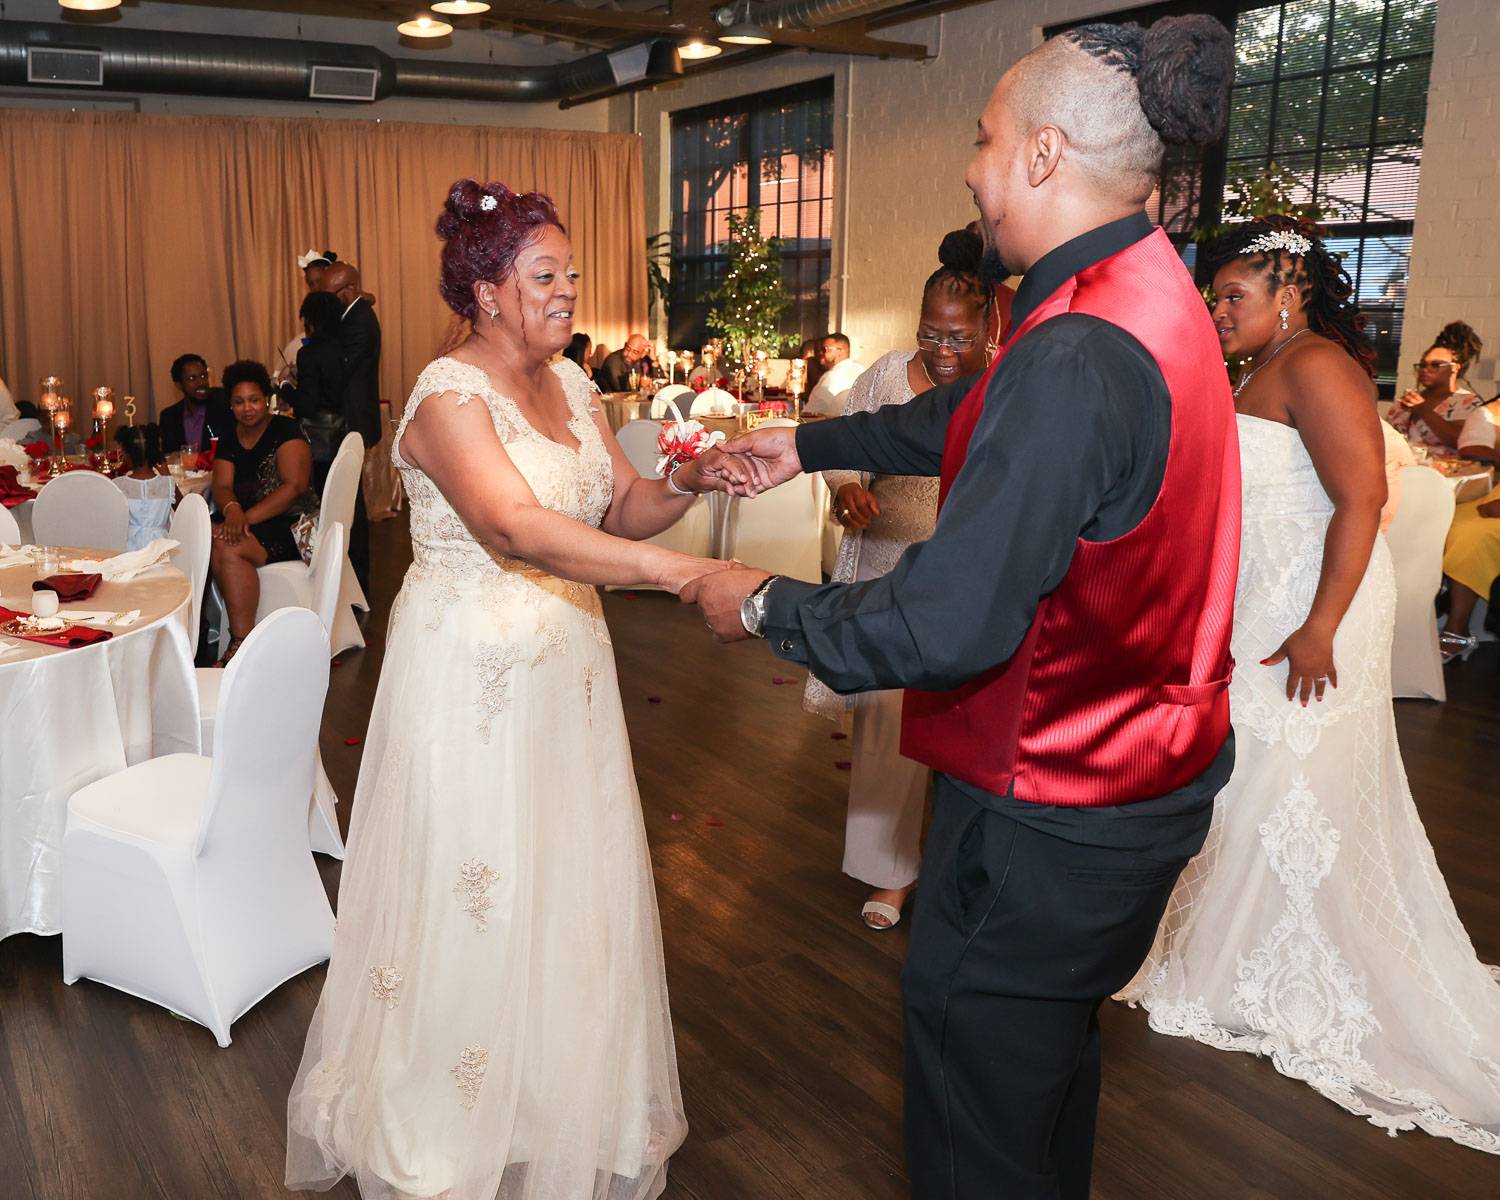 The groom dancing with his mother-in-law gently